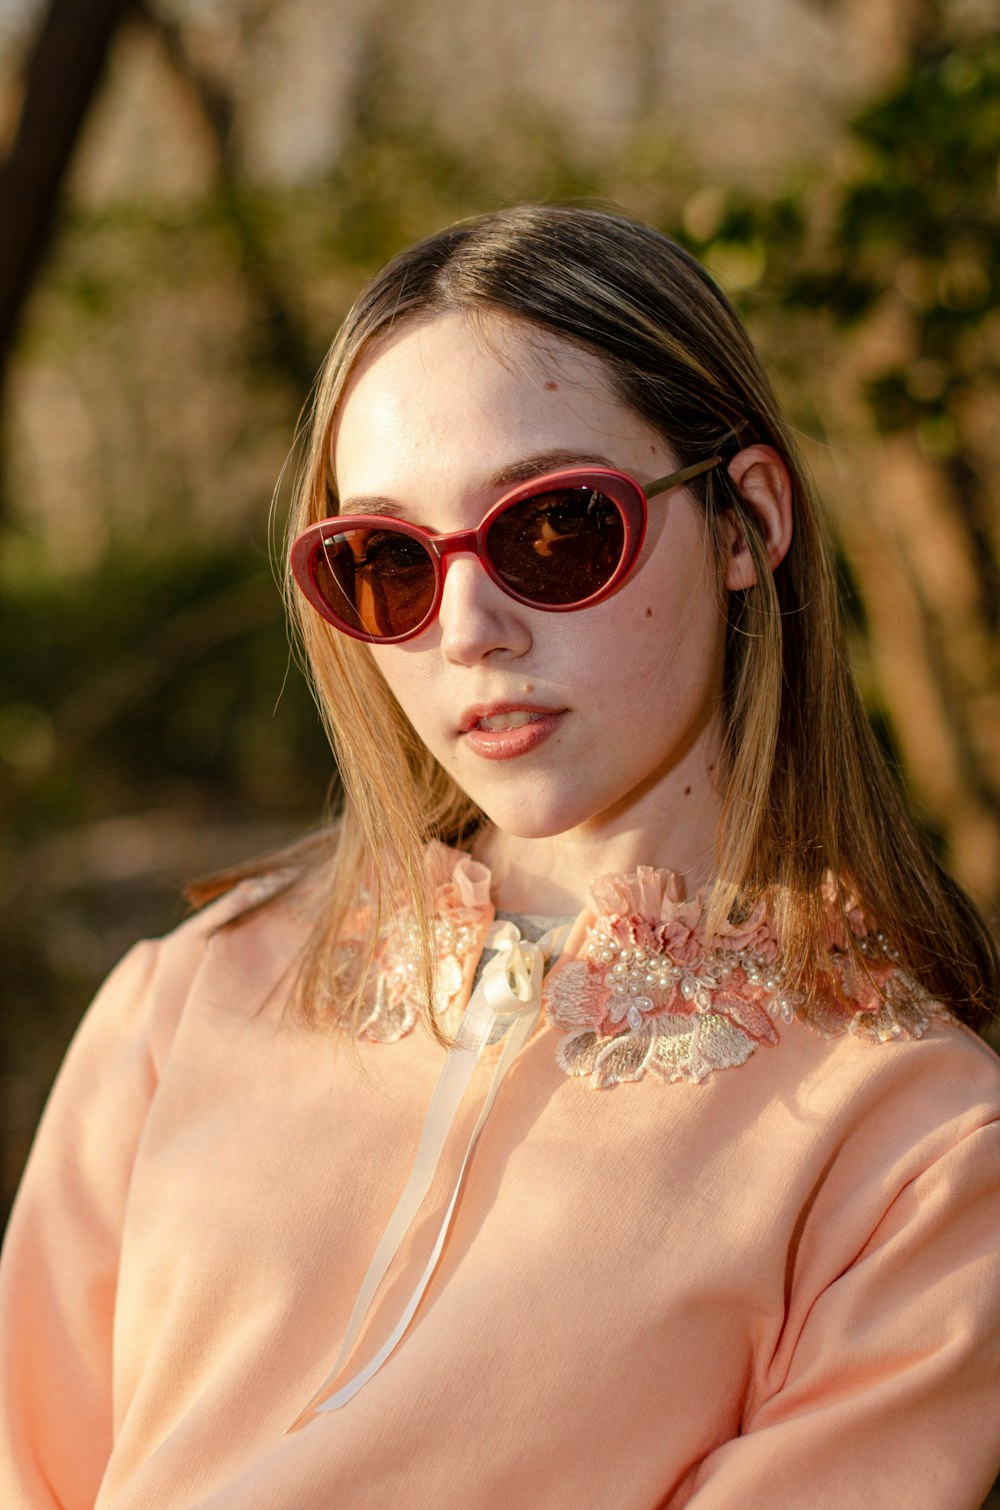 a woman wearing sunglasses and a pink shirt